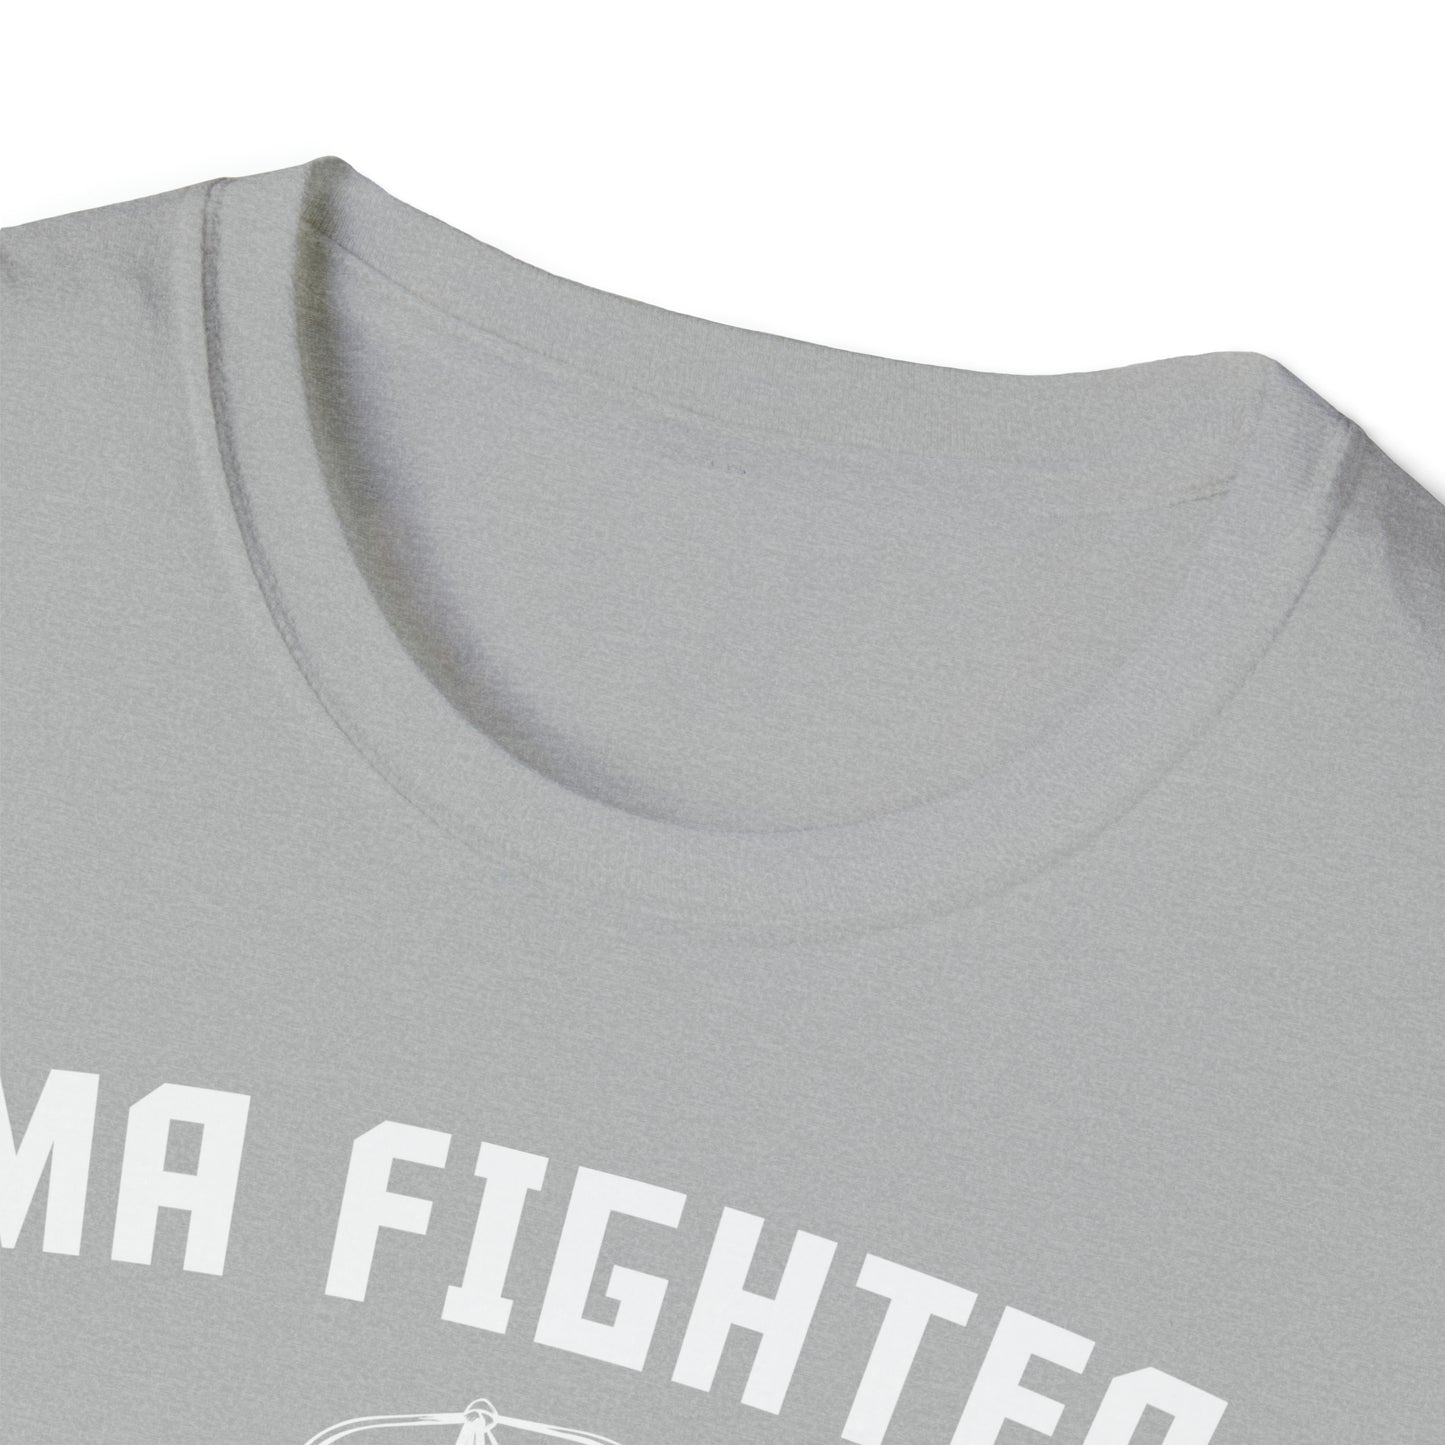 Fighter - Unisex Softstyle T-Shirt